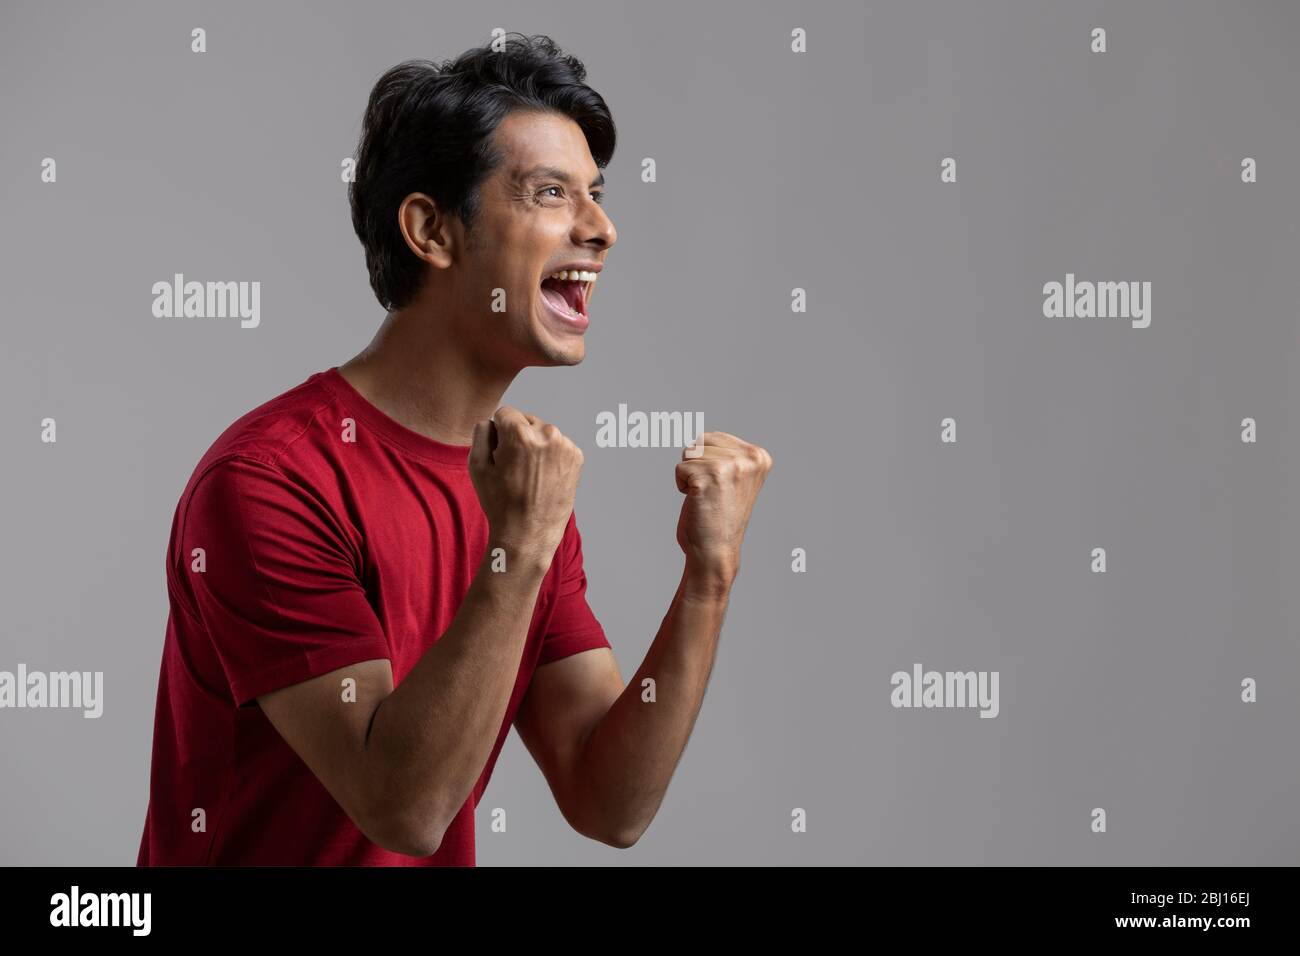 young man clenching fist in excitement and cheering Stock Photo